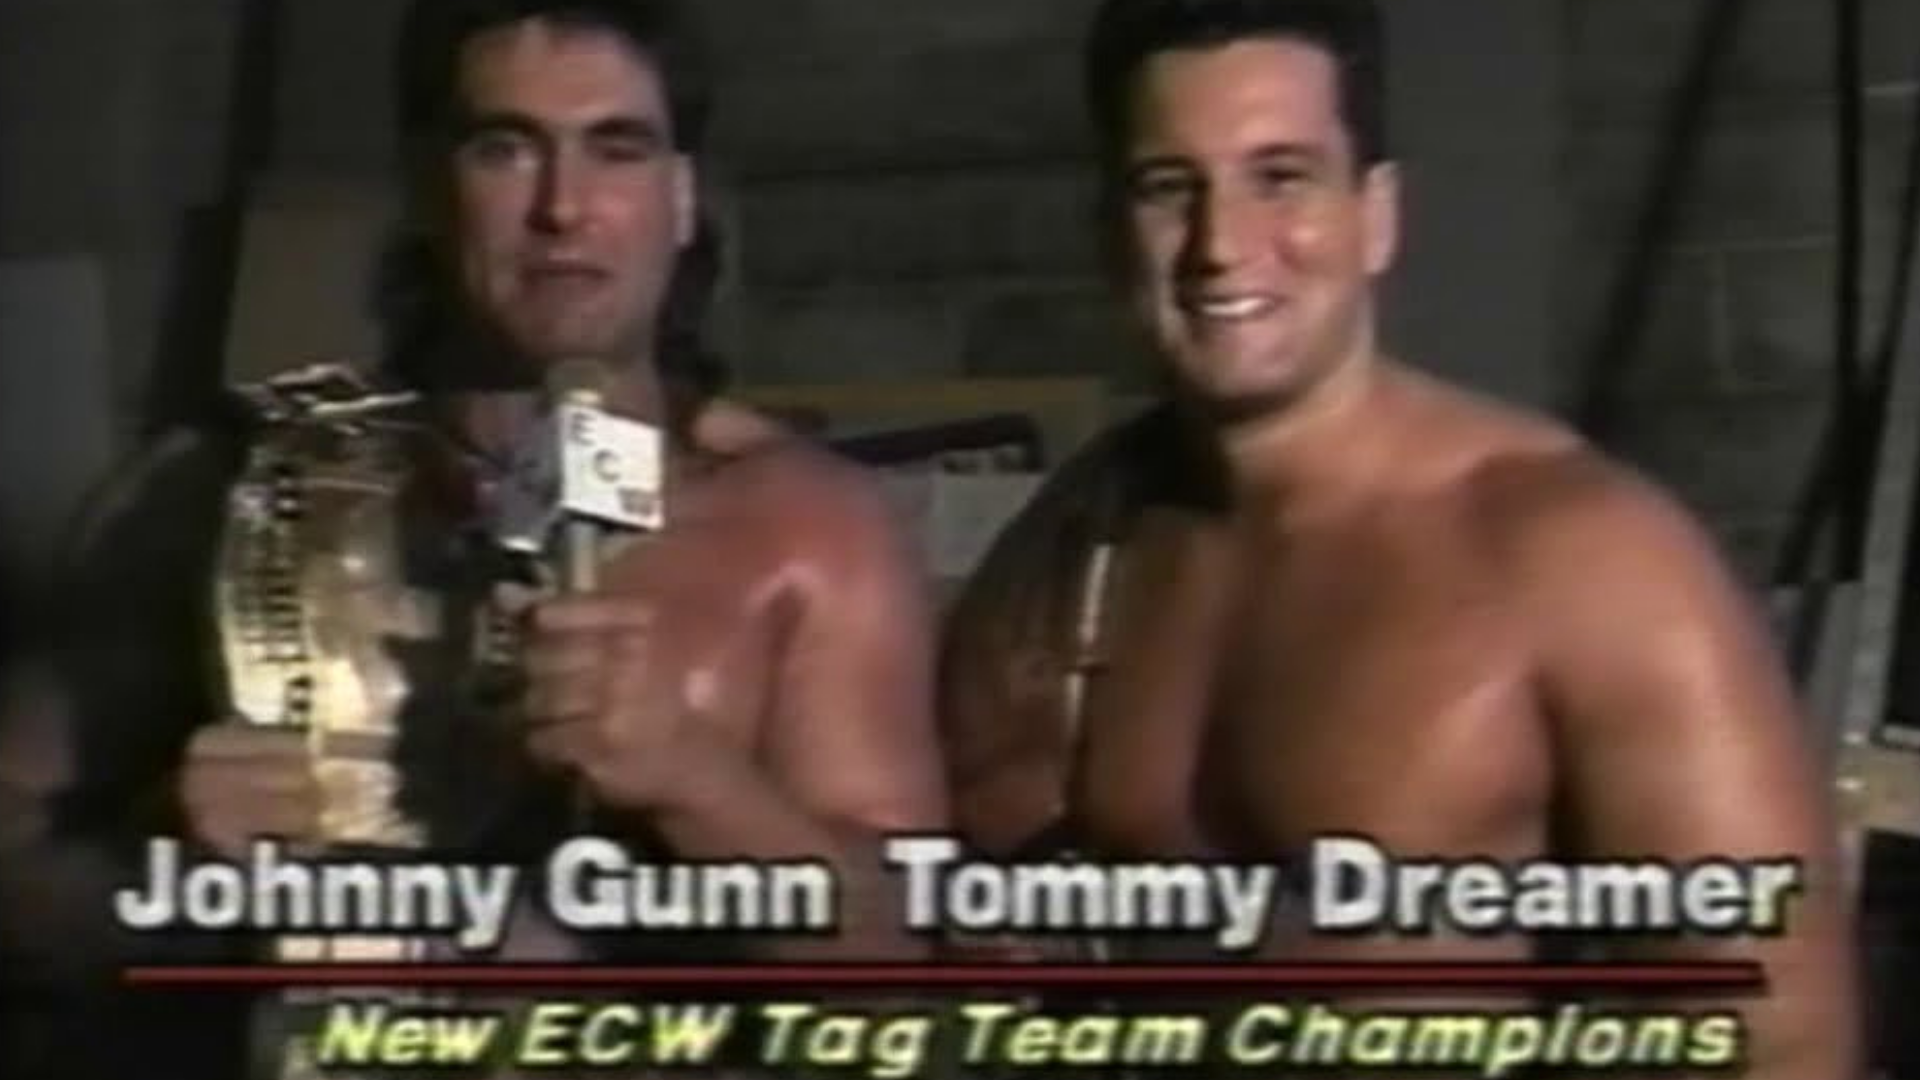 A young Tommy Dreamer in 1993